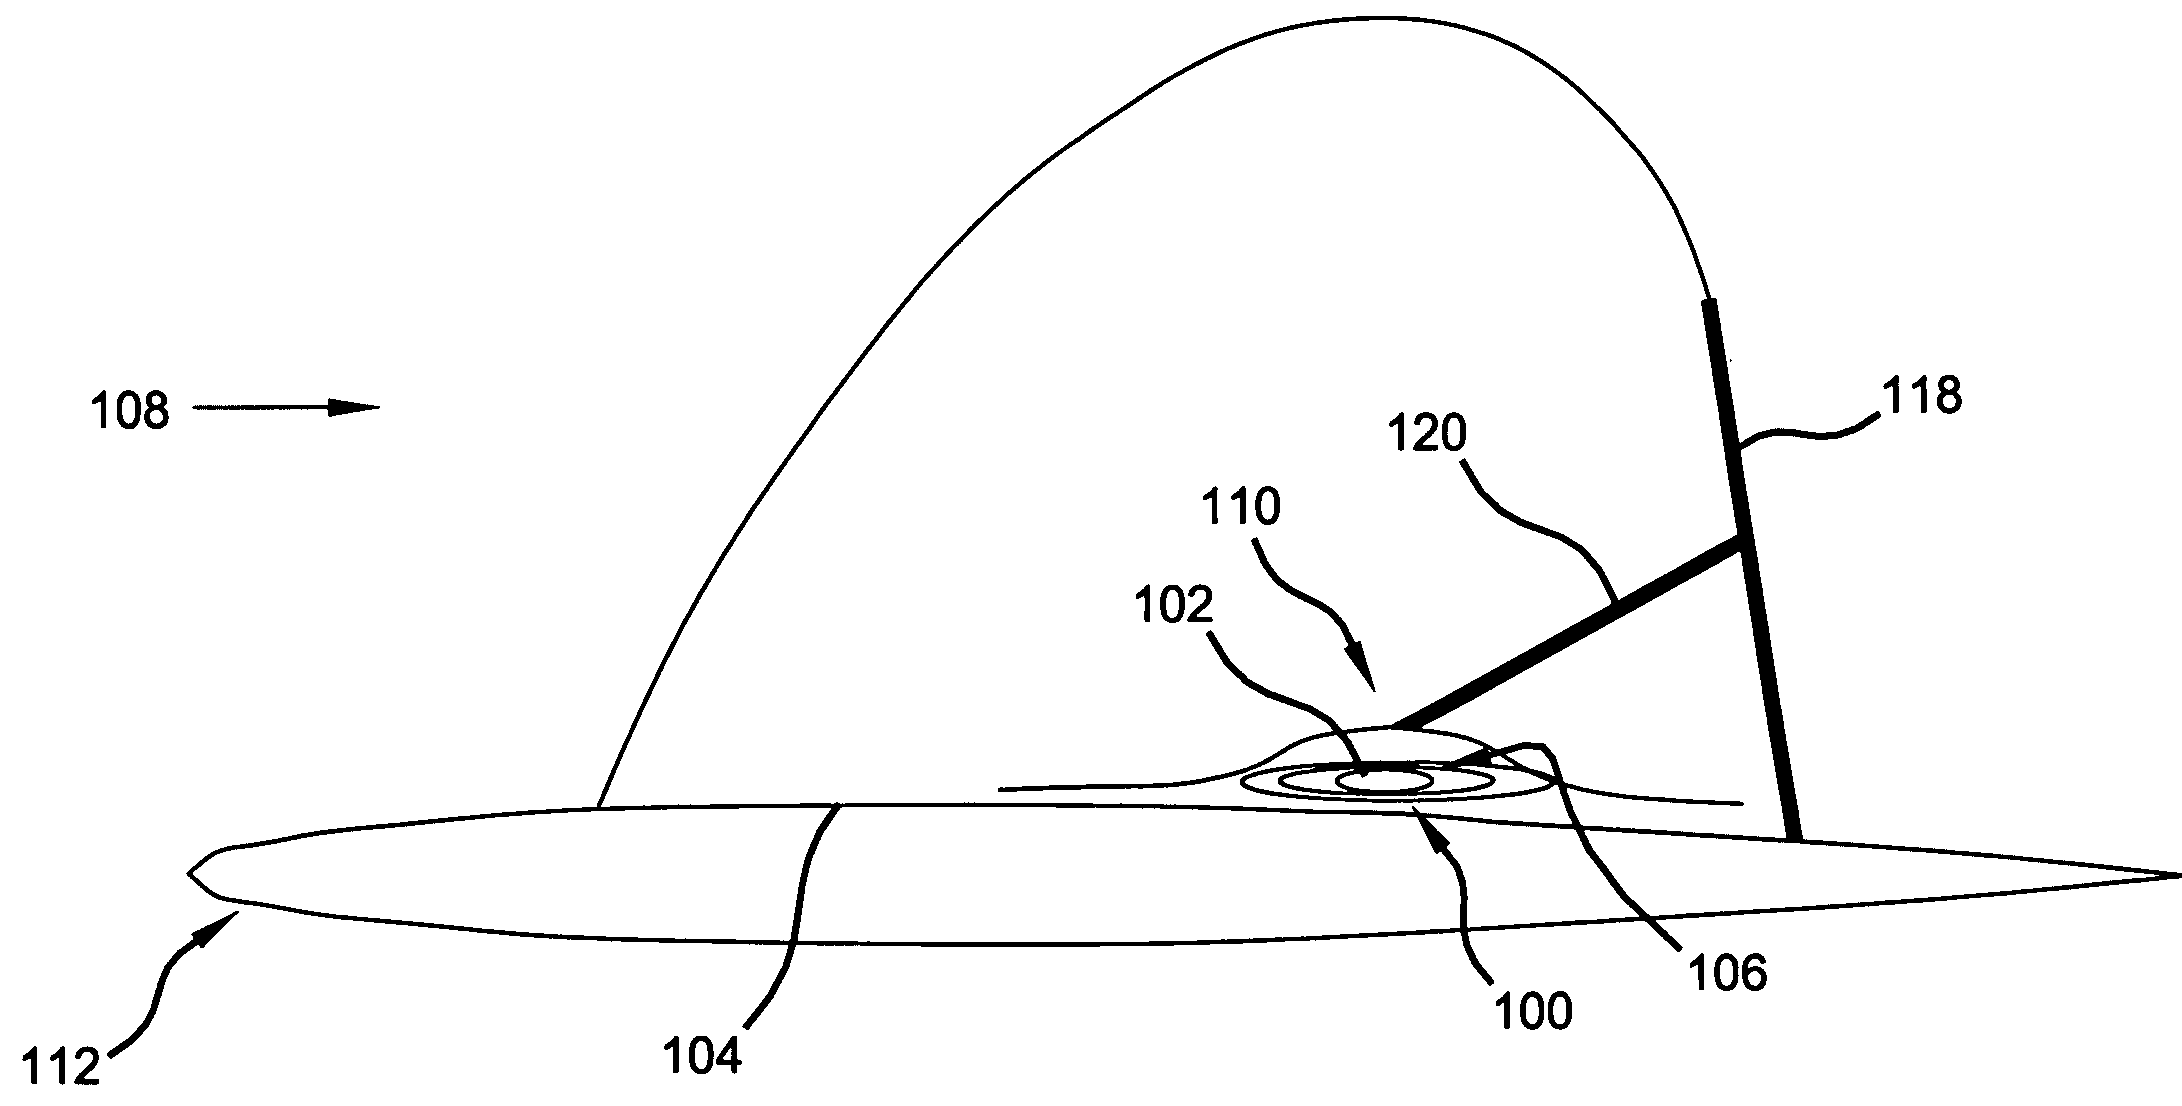 Dynamic bumps for drag reduction at transonic-supersonic speeds